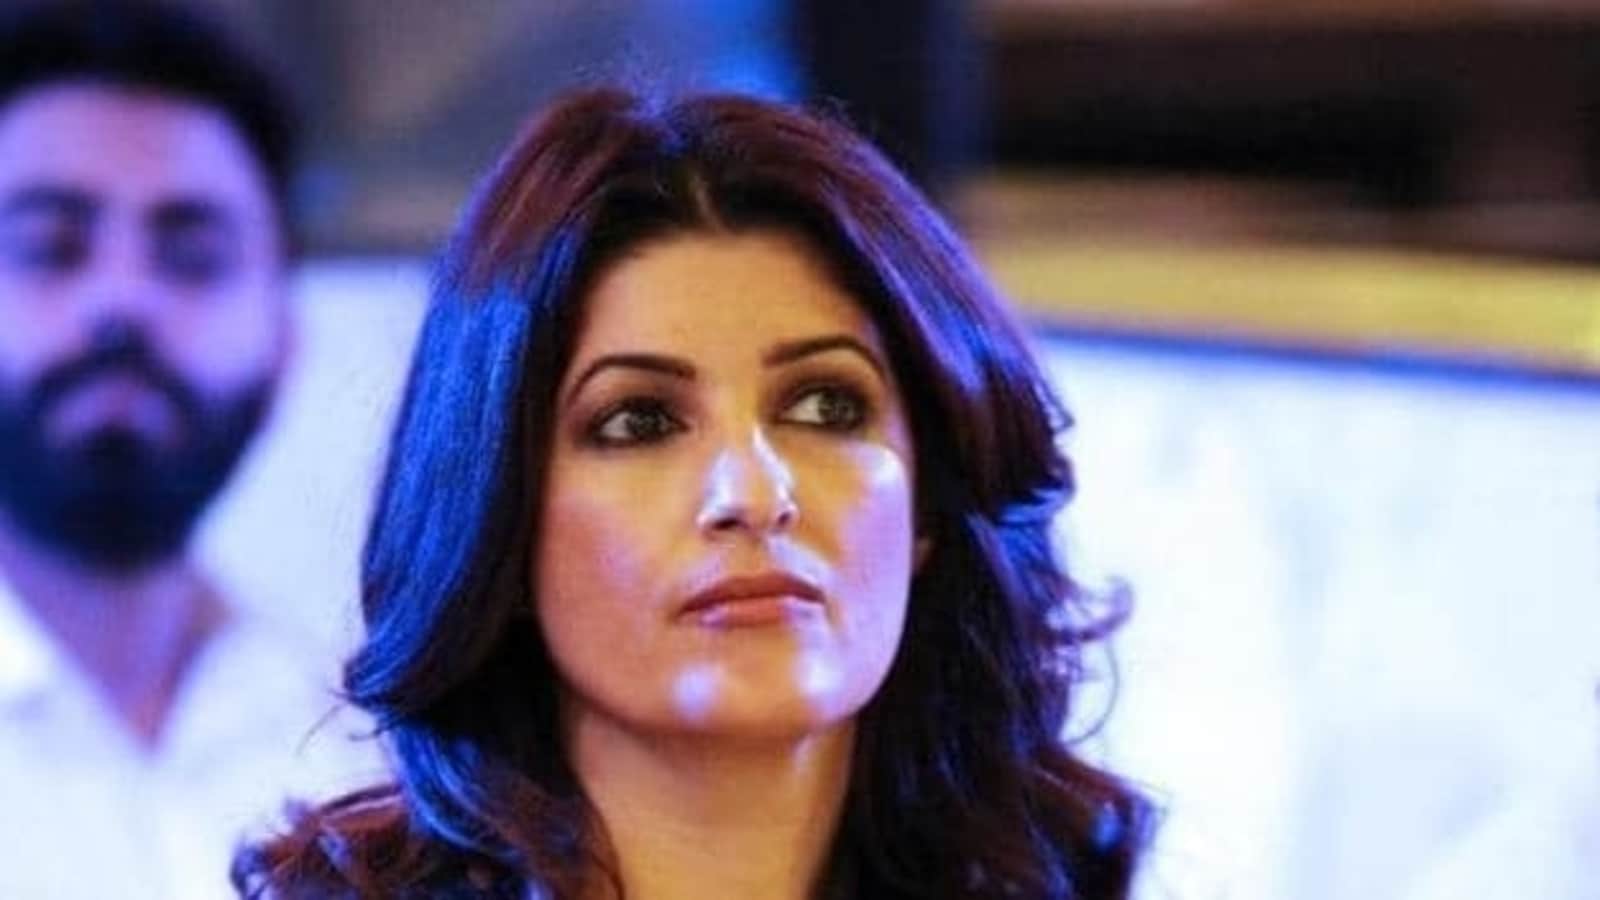 Twinkle Khanna jokes about making ‘Nail File’ movie: ‘Better than putting the final nail into the communal coffin’